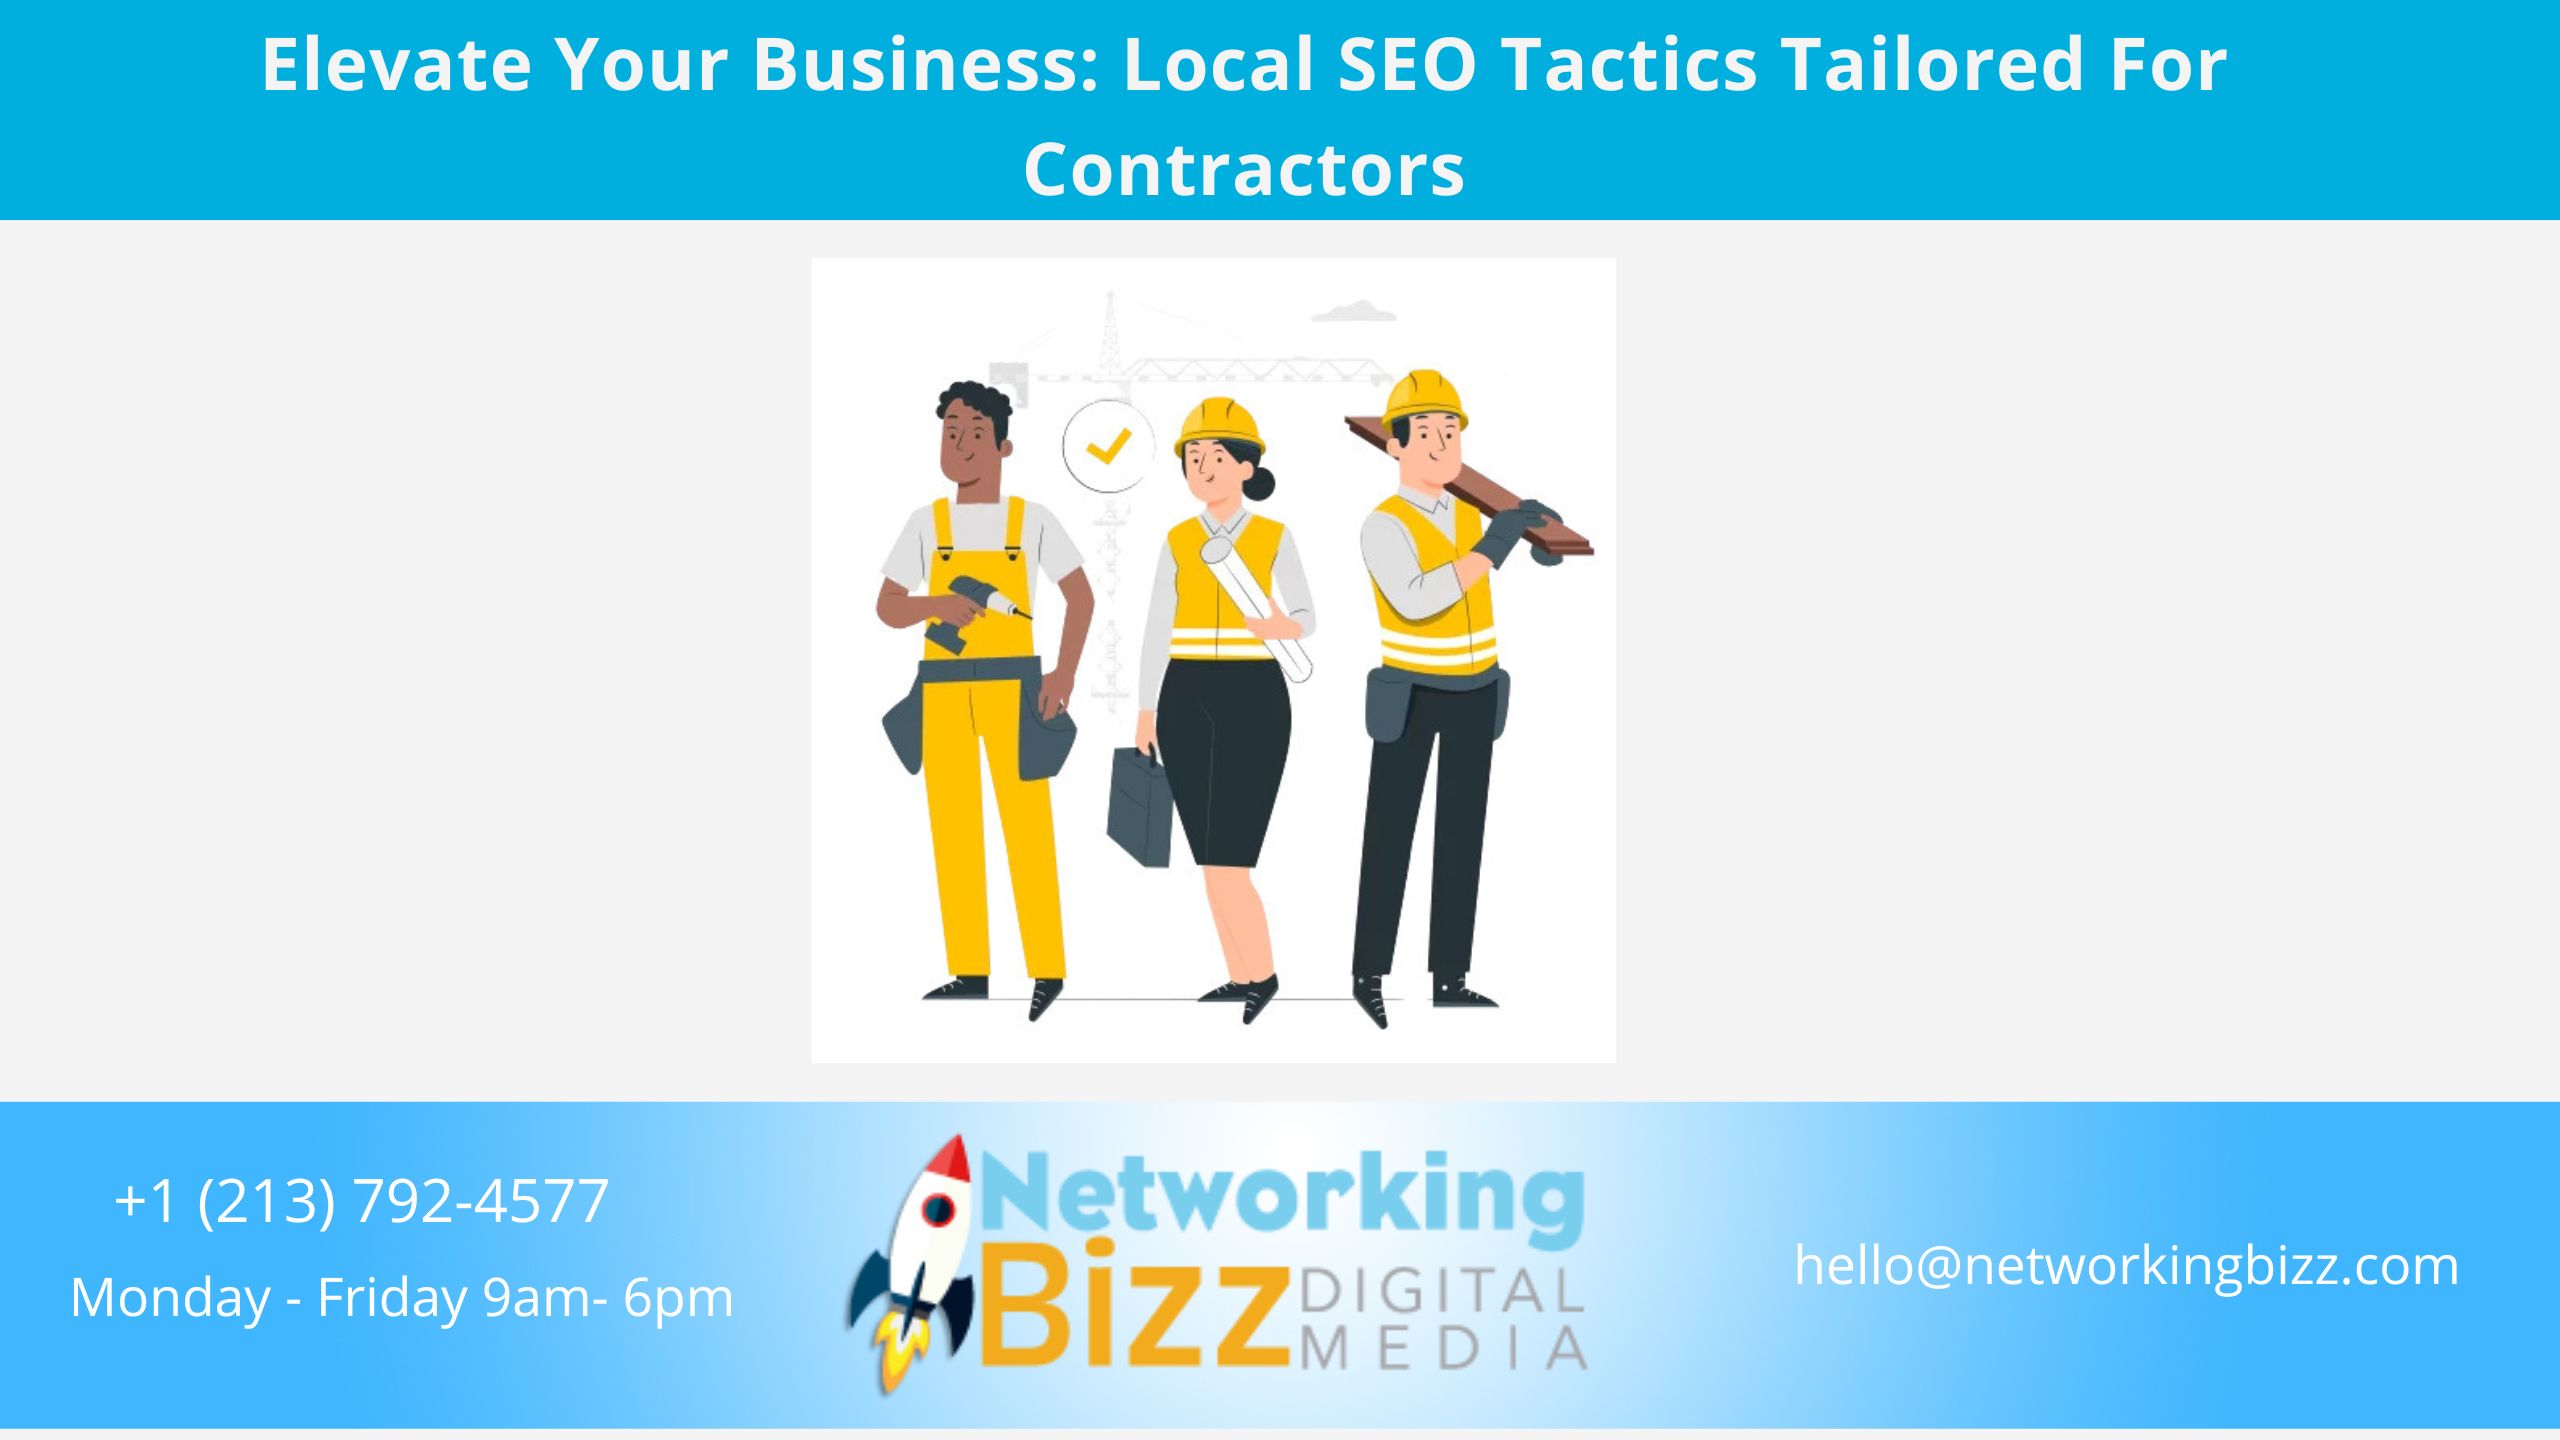 Elevate Your Business: Local SEO Tactics Tailored For Contractors